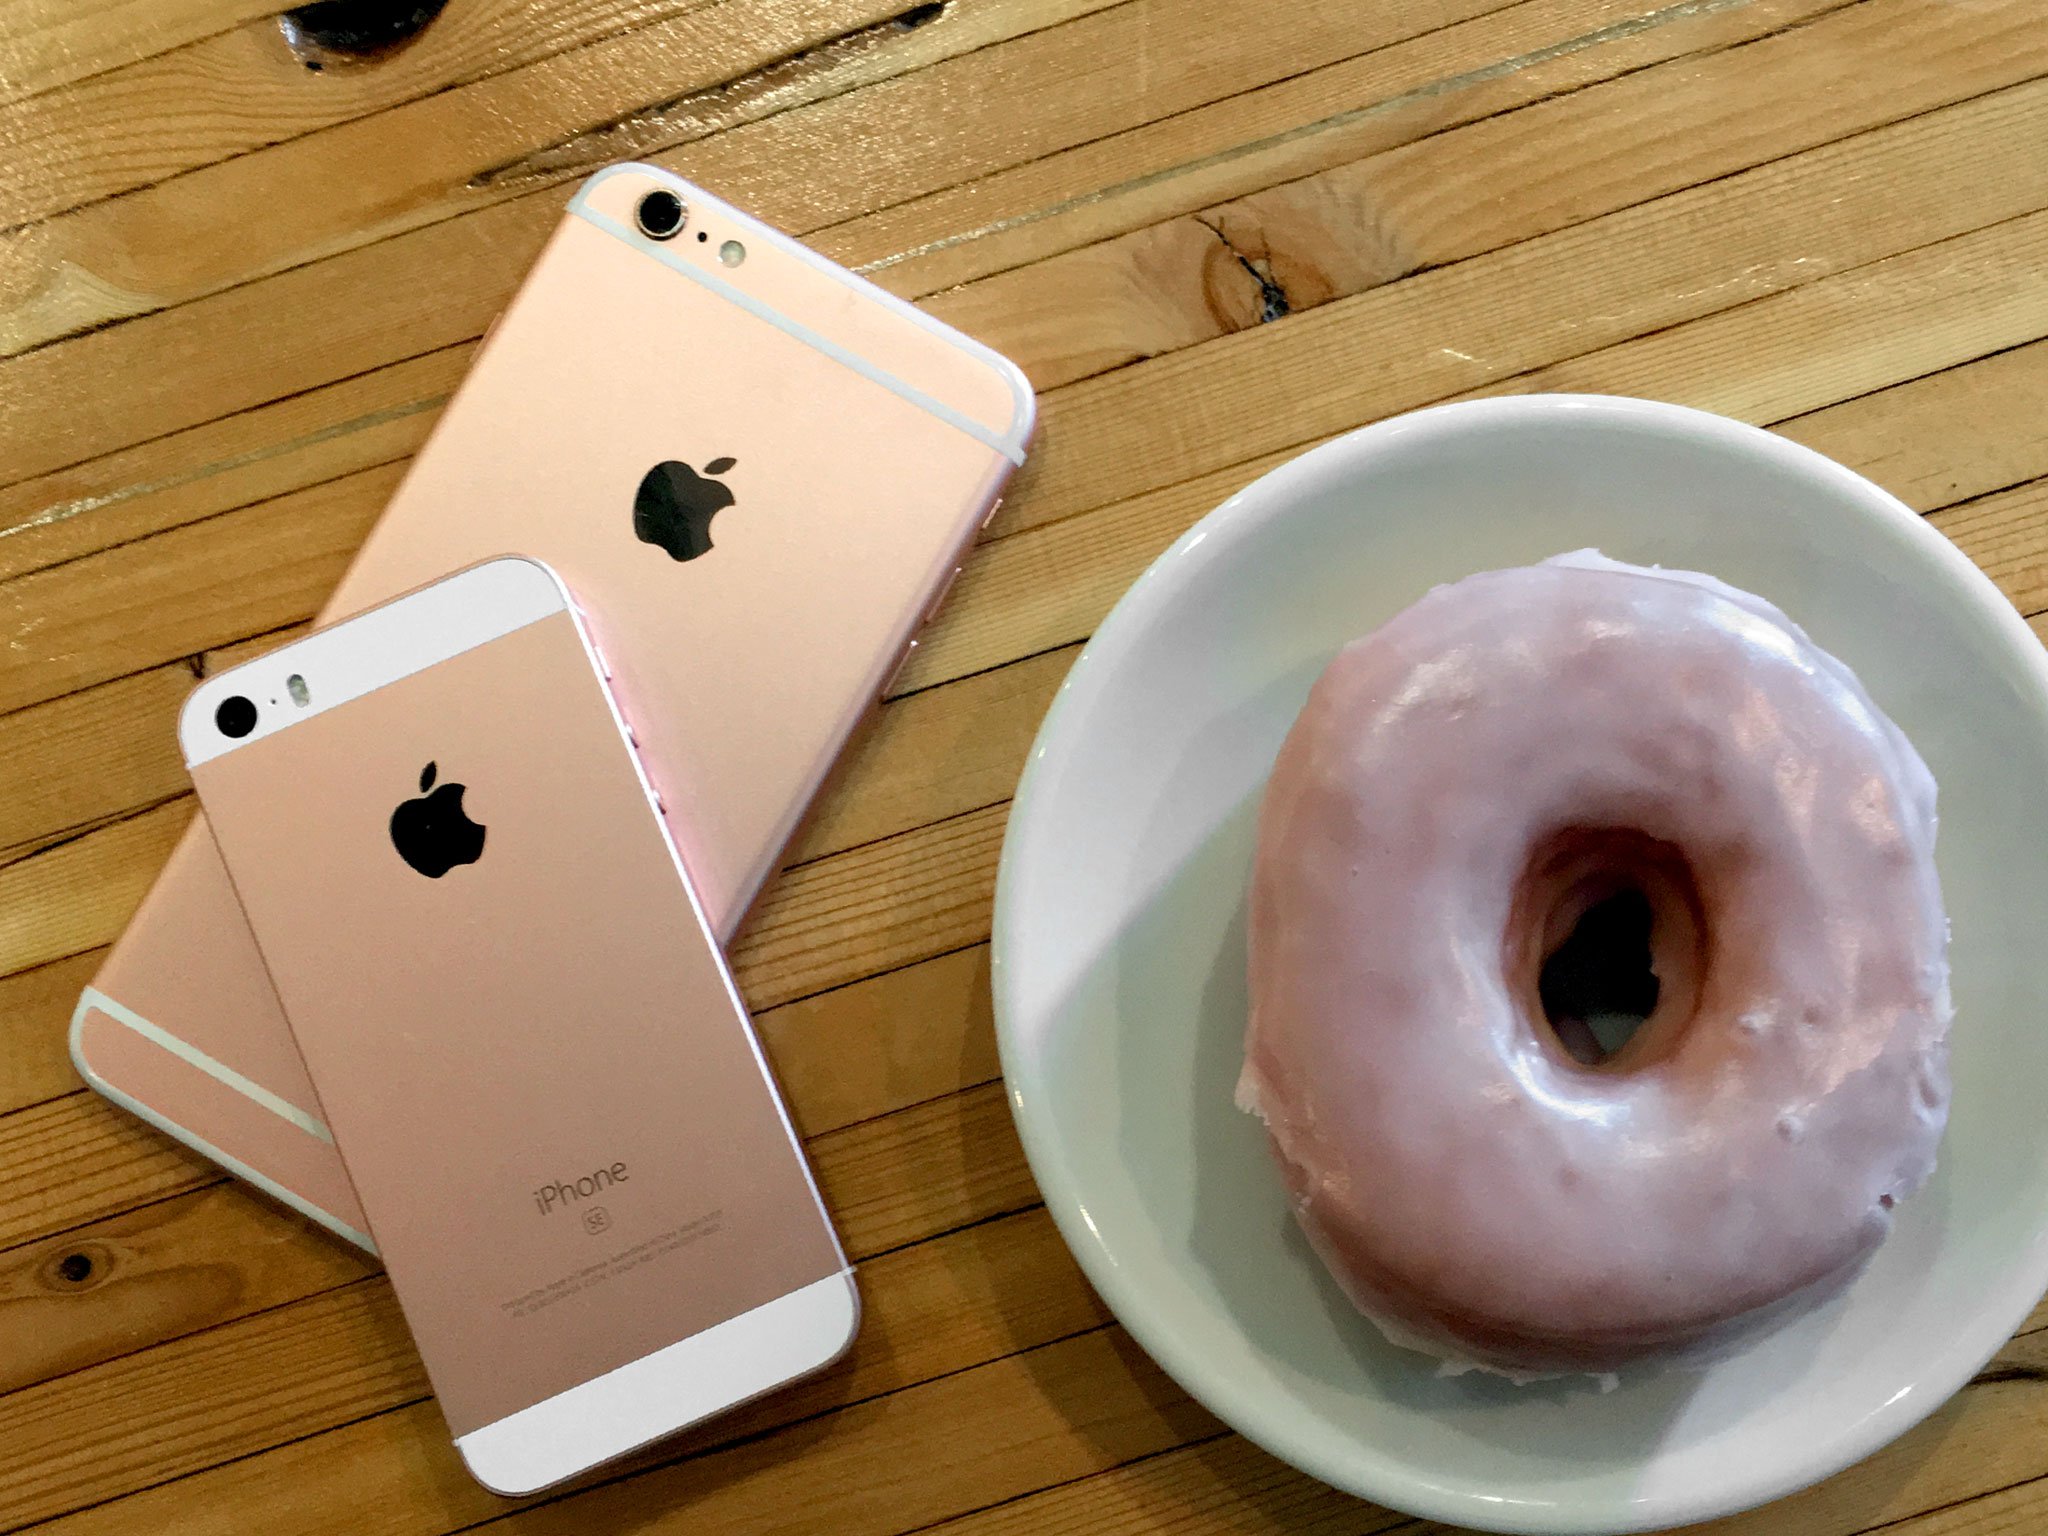 iPhone 6S vs iPhone SE: What's different and which should you choose?